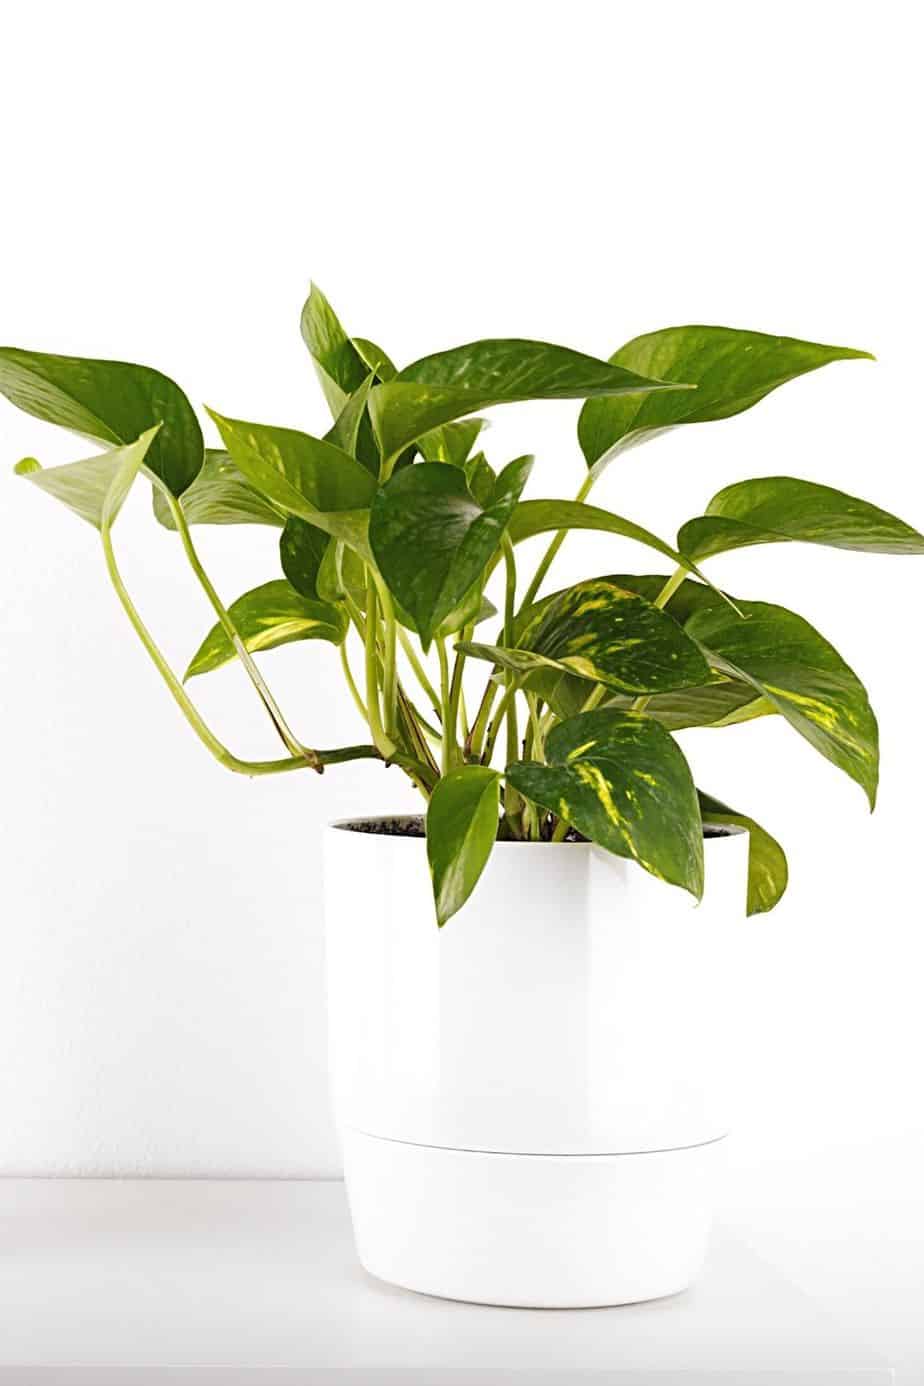 Another oxalate-containing plant, Pothos or Devil's Ivy causes oral irritation to your cats once they ingest it